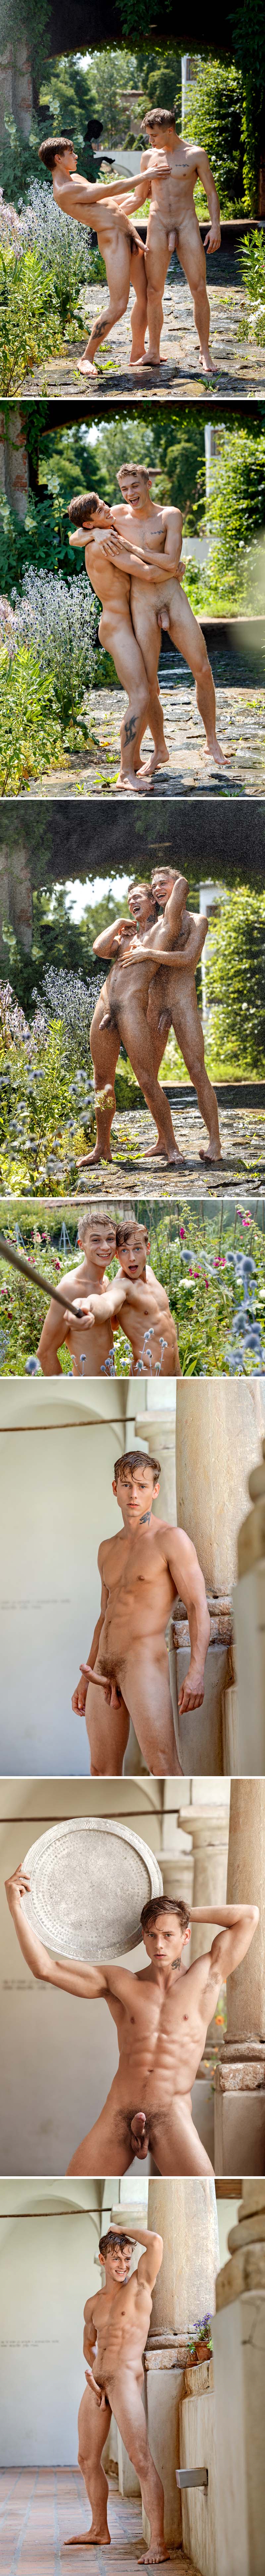 Kevin Warhol & Jamie Durrell [Models of the Week] at BelAmiOnline